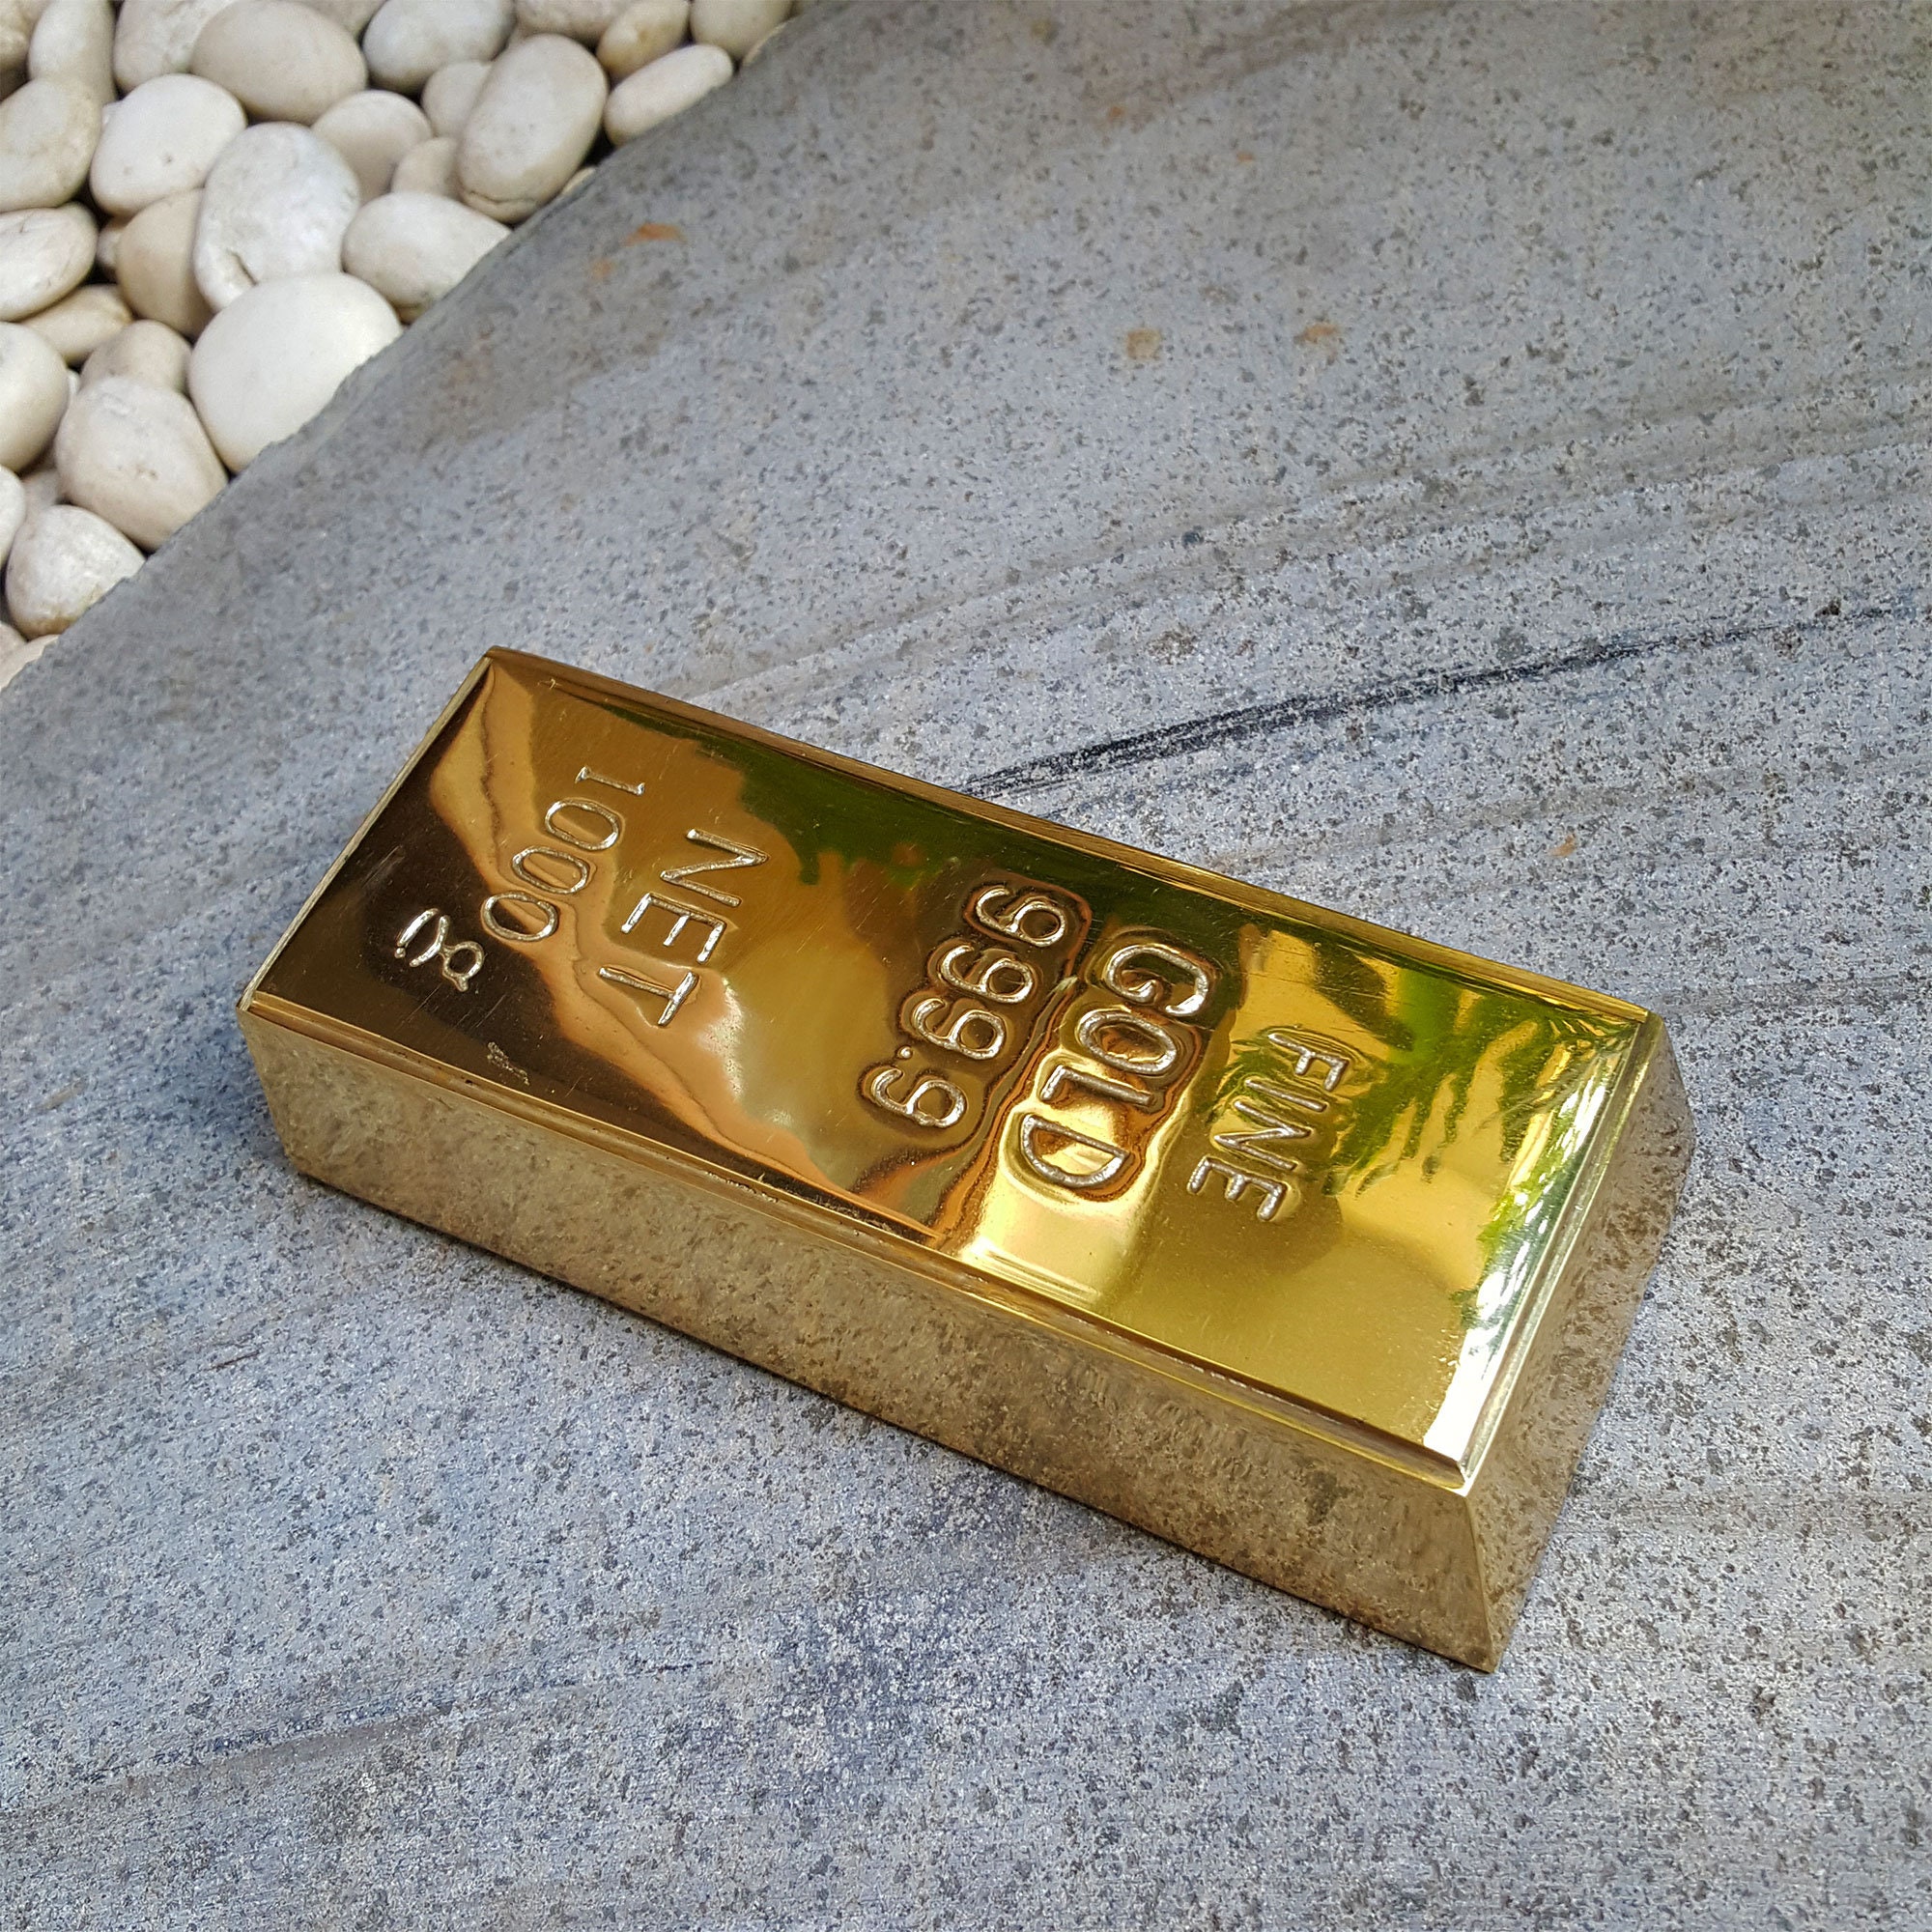 3 Brass Pieces SPECIAL PRICE Unique Fake Fine 999 GOLD Bullion Bar Paper  Weight 6 Solid Polished Brass Cast Hollow Inside Very Heavy 16cm 